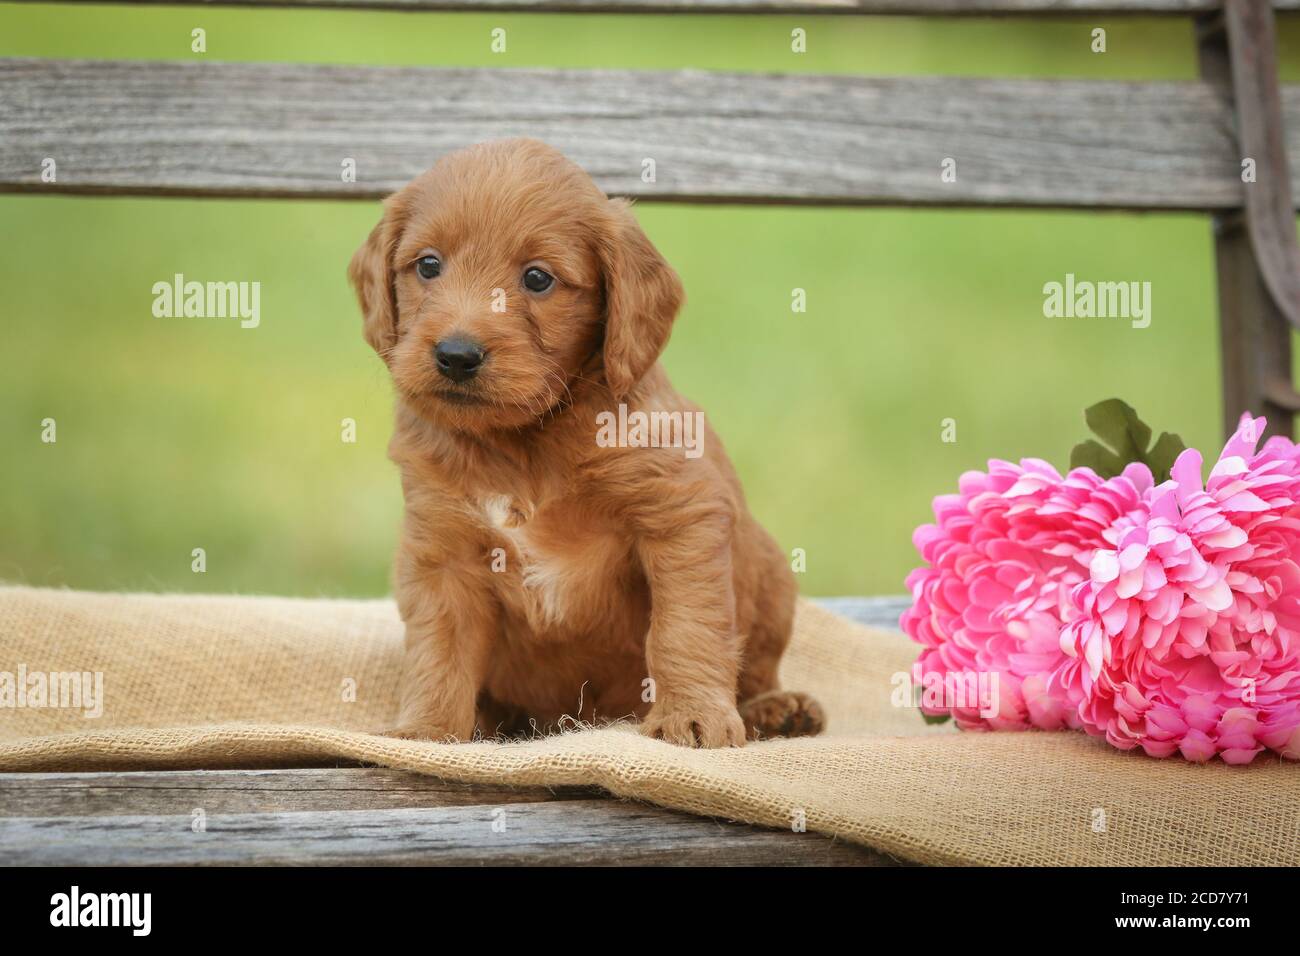 F1 Goldendoodle Puppy sitting on a bench by flowers Stock Photo